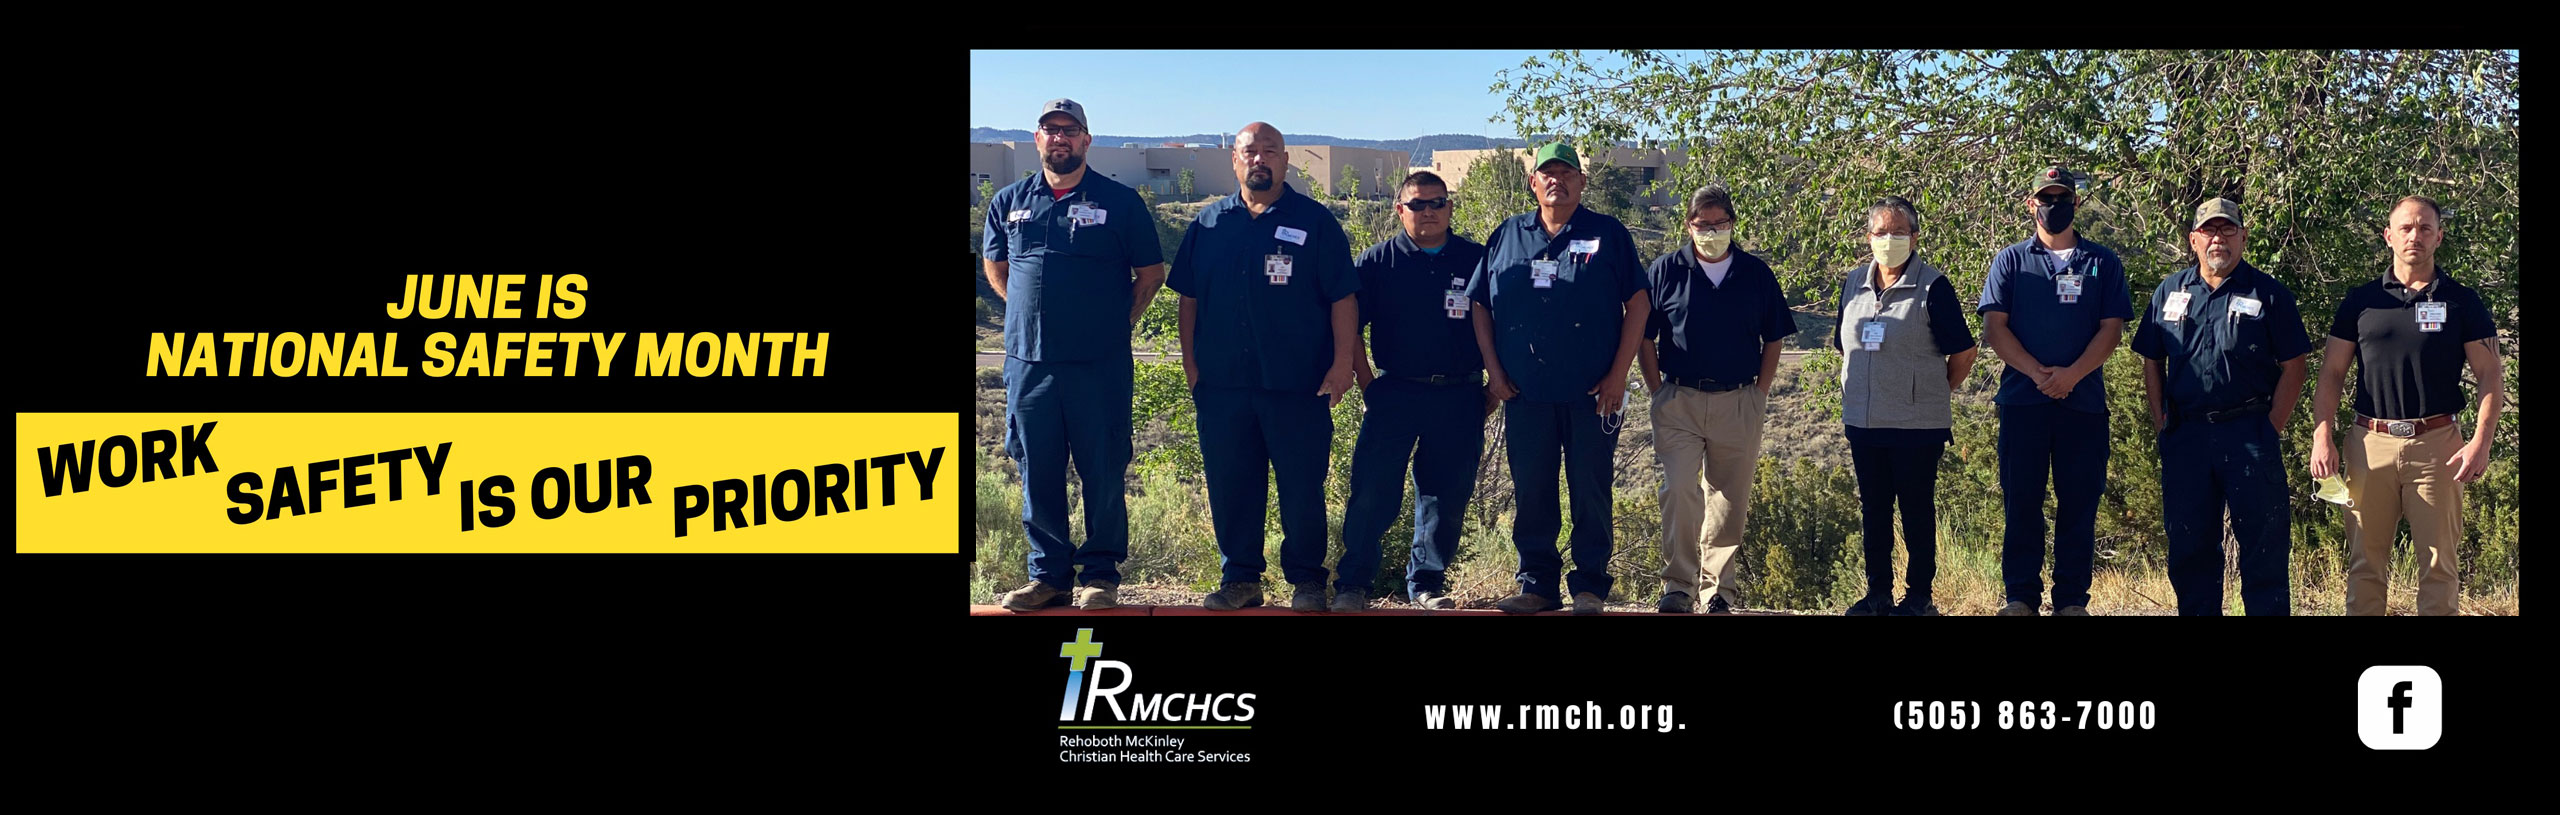 Banner picture of The Safety Team outside of the Hospital. There is seven males and two females. Banner says:

JUNE IS
NATIONAL SAFETY MONTH
WORK SAFETY IS OUR PRIORITY
RMCHSC-Rehoboth Mckinley Christian Health Care Services
(505) 863-7000  wwww.rmch.org
(f) <- Facebook Logo